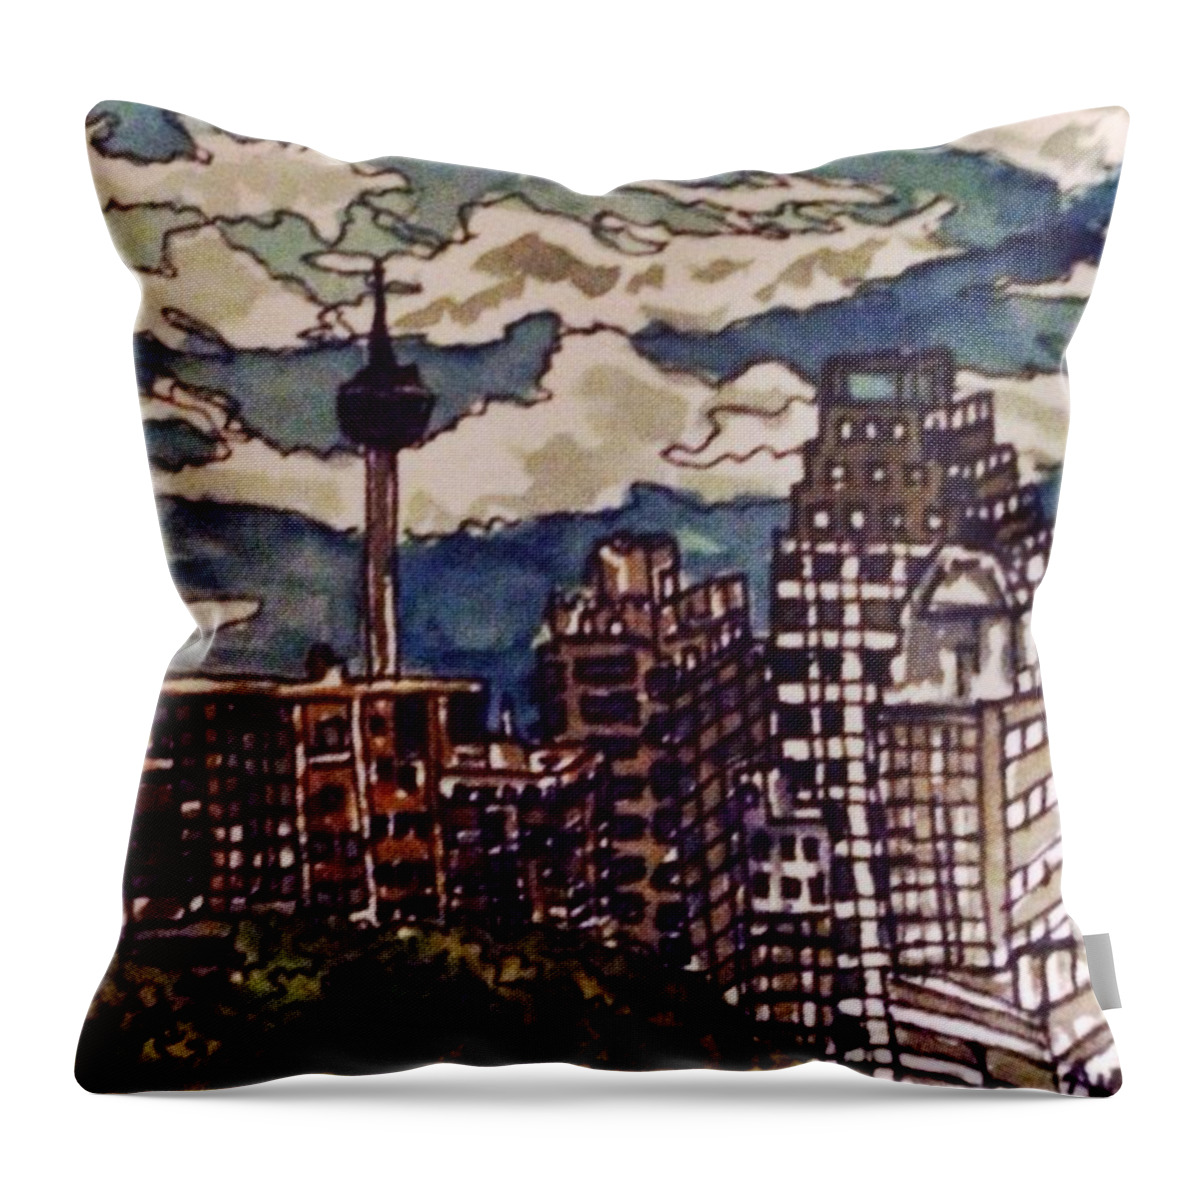 Cityscape Throw Pillow featuring the painting San Antonio Skyline by Angela Weddle